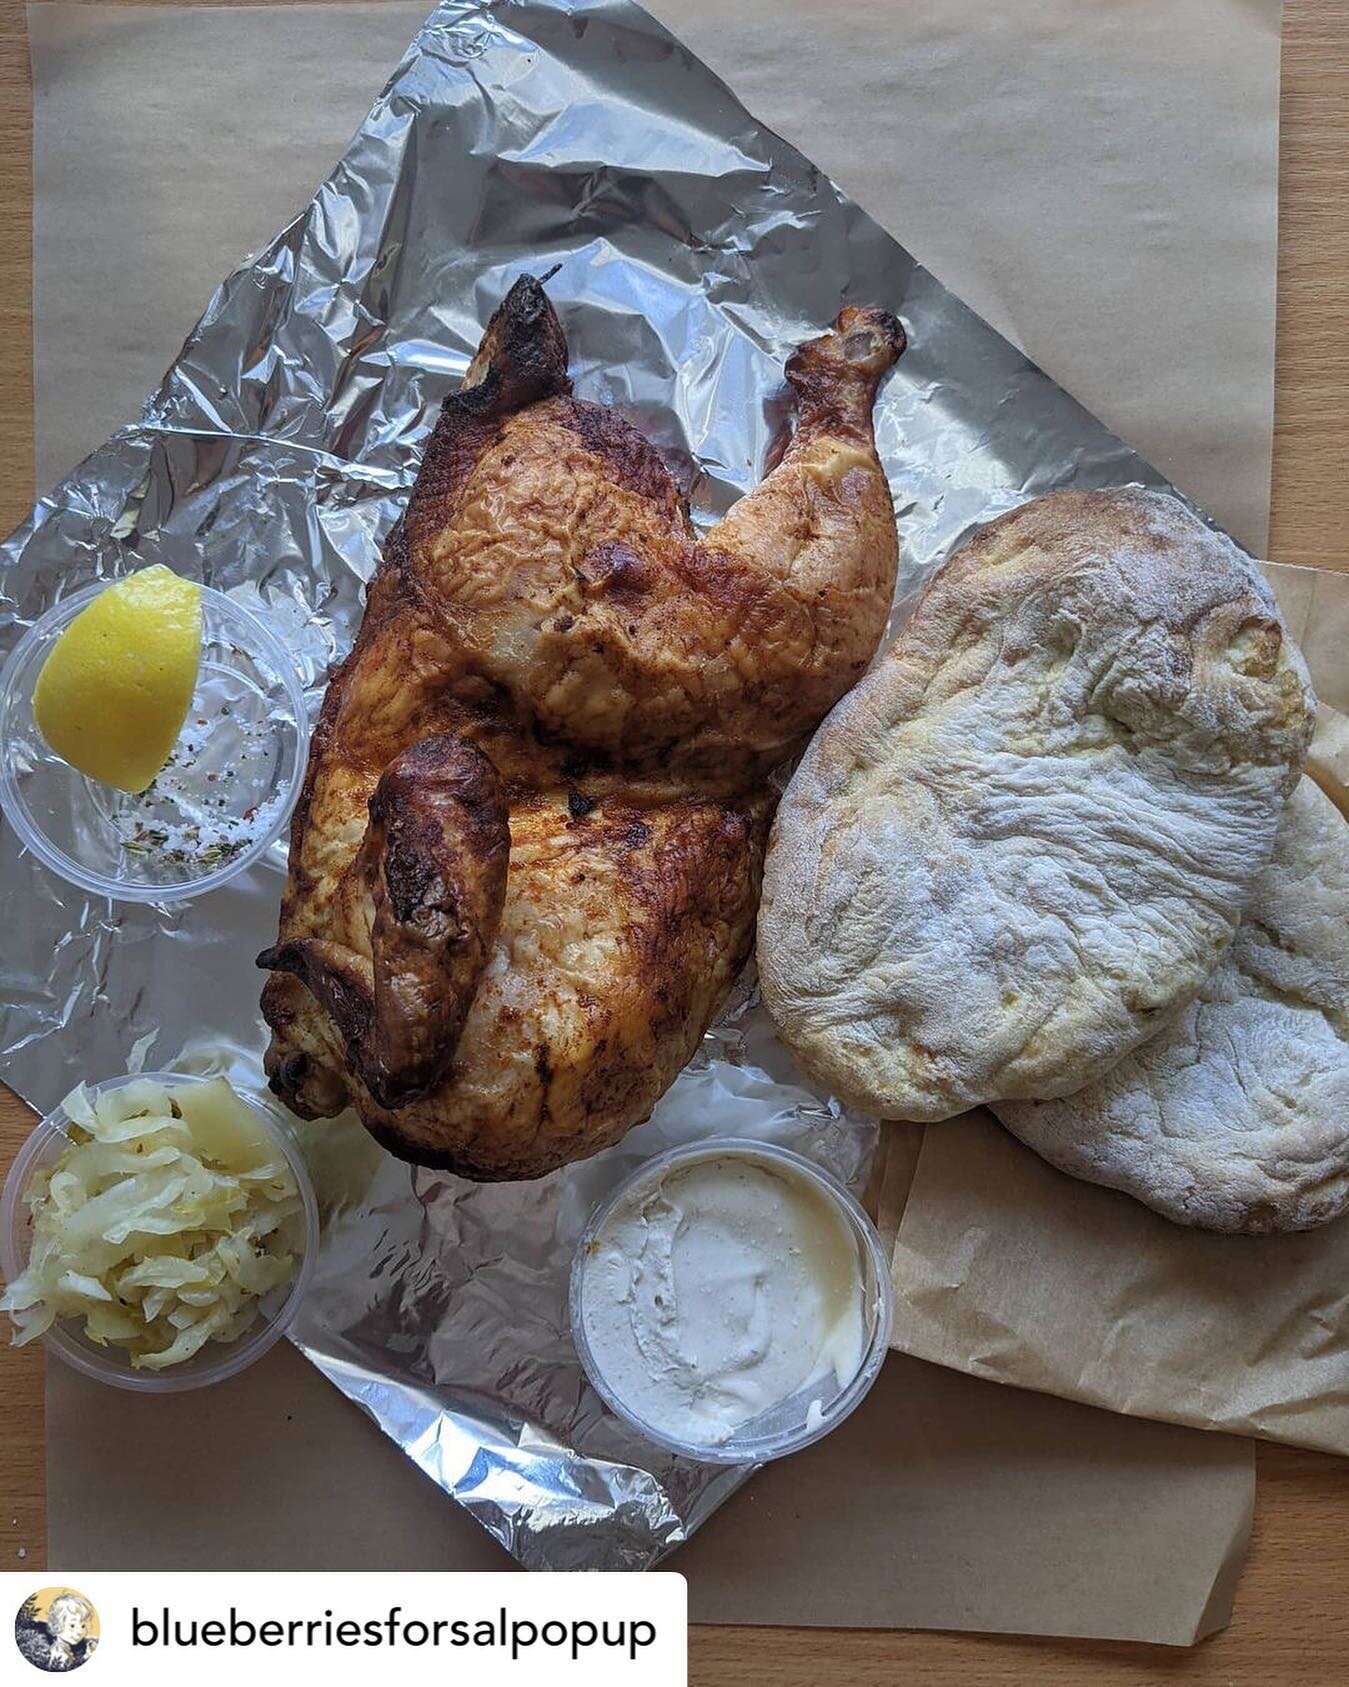 Pop pop!  @blueberriesforsalpopup - Sunday roast chicken mega kit. this one 👉 
an ode to my favorite all day Sunday grazing.
Smorgasbord Sunday this weekend!

our friends @labottega.boston are 
making a special maple #gelato for this kit. eat it whe